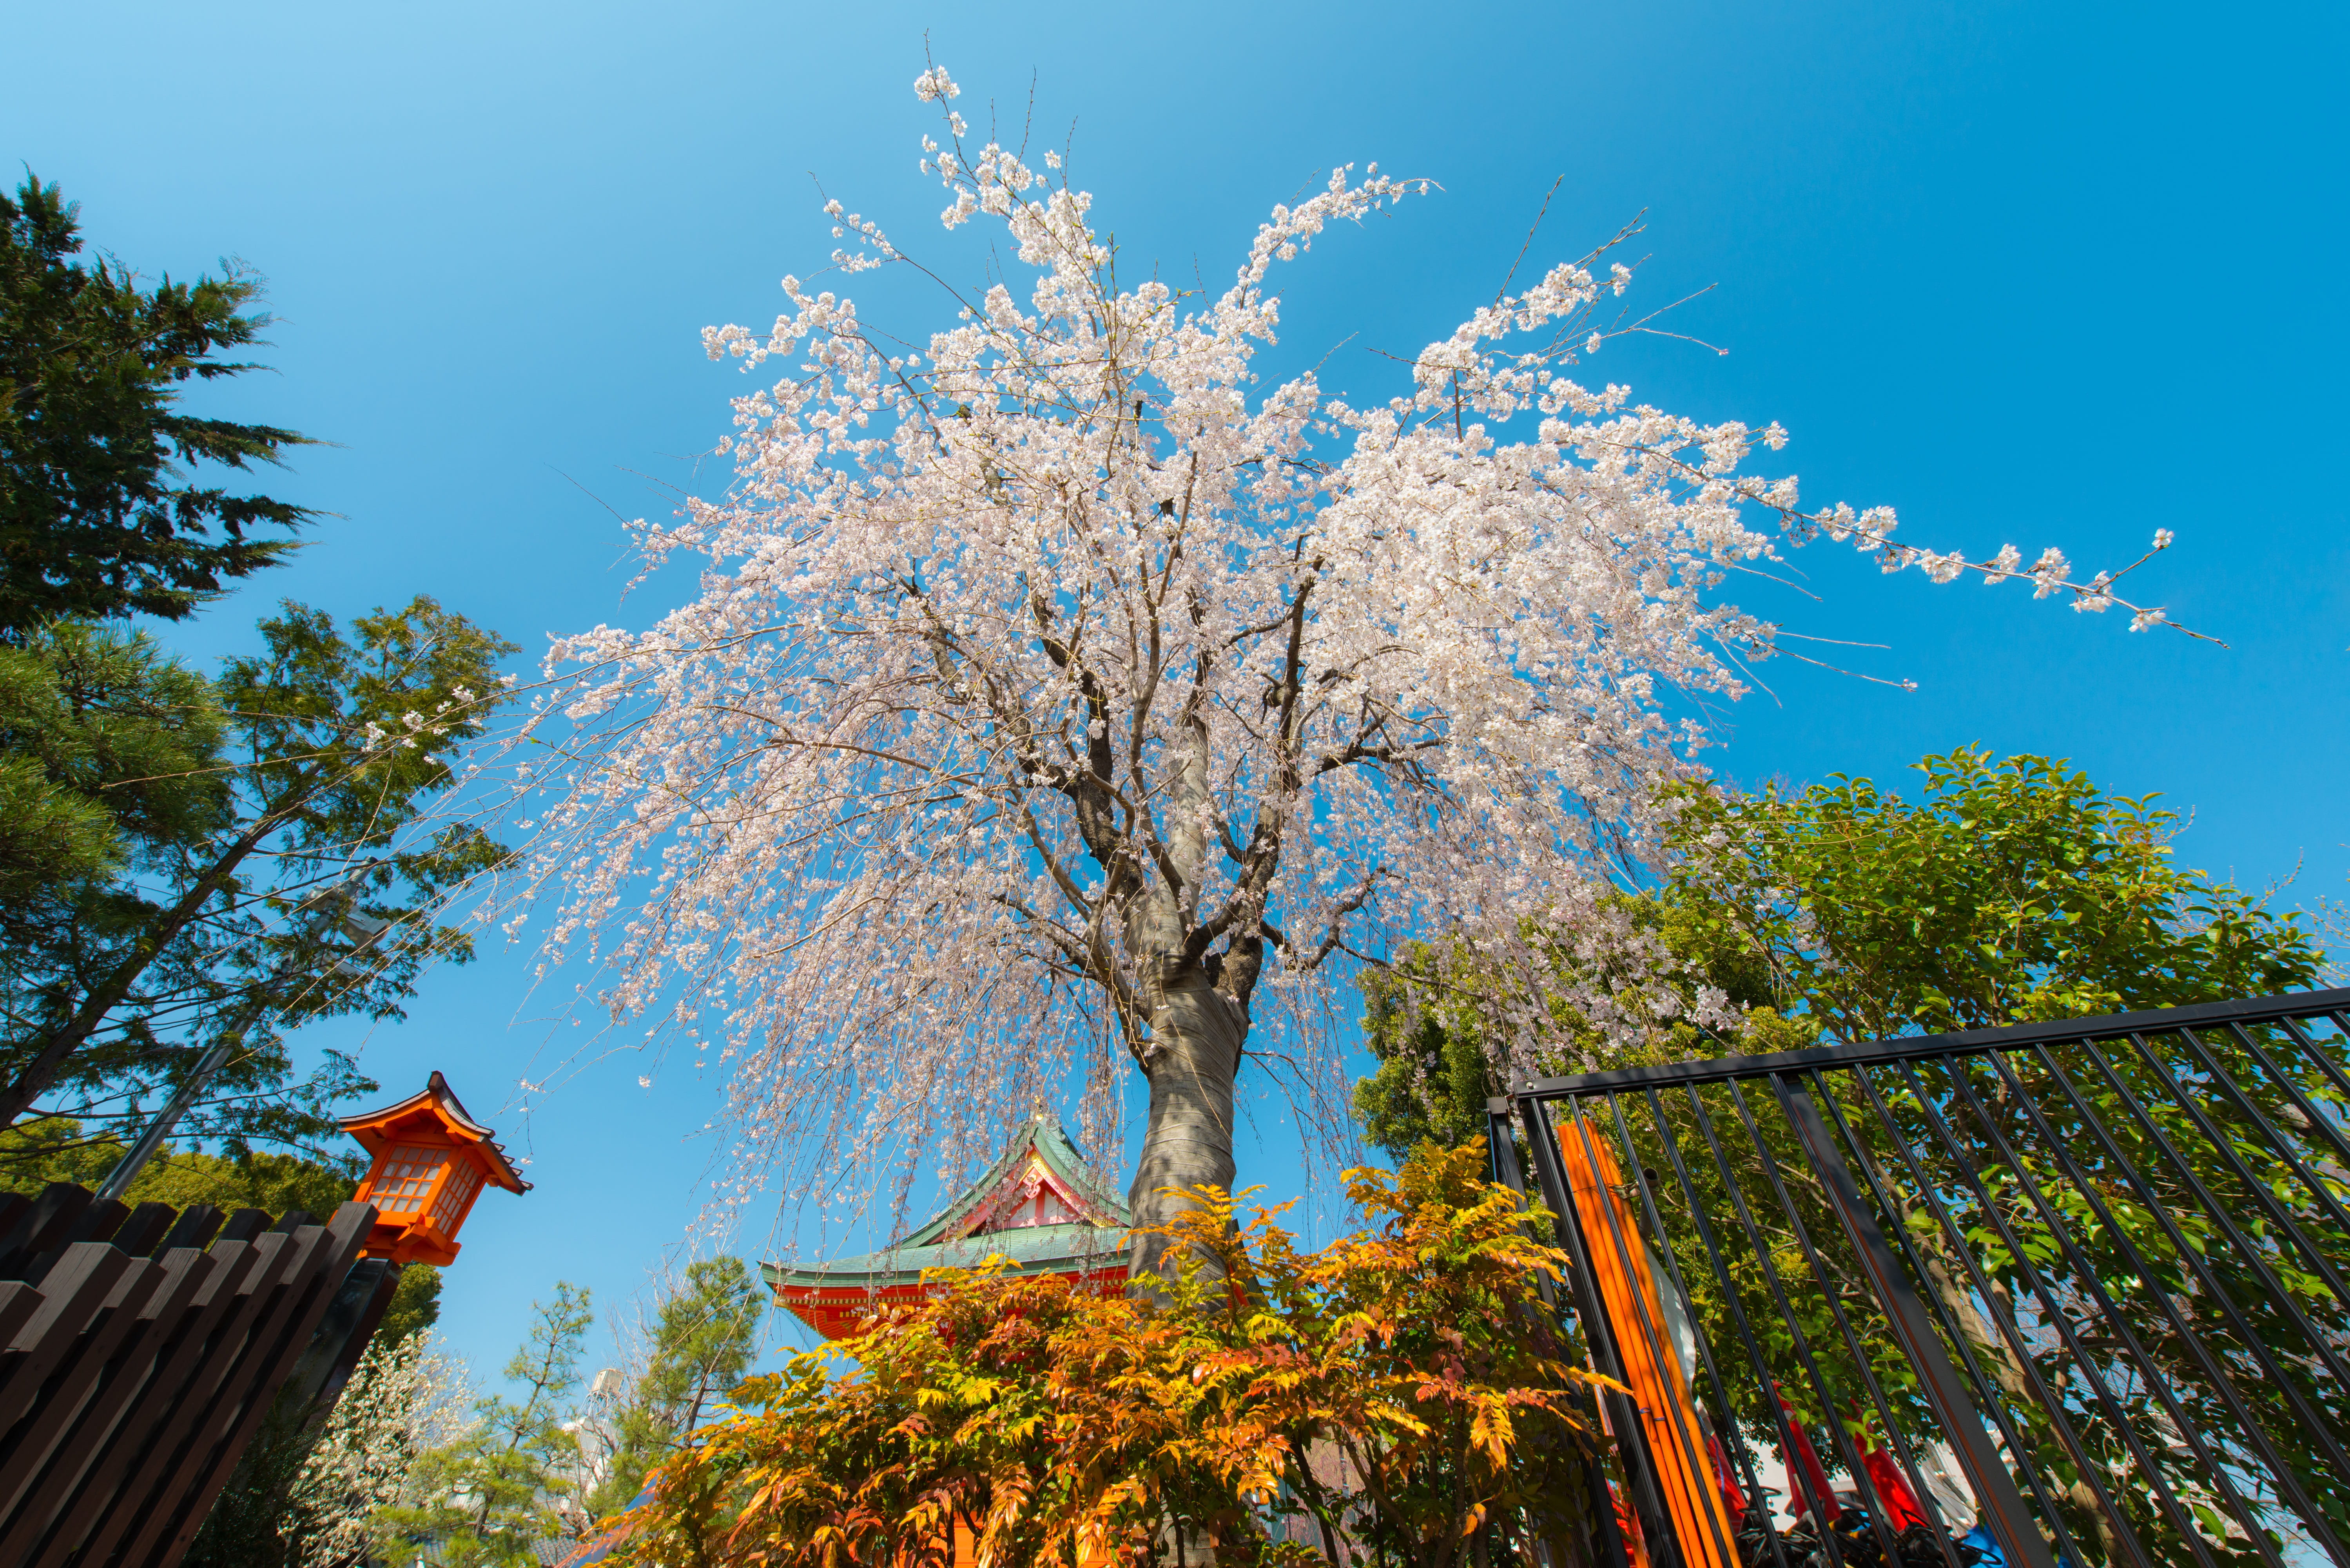 low-angle photo of cherry blossom tree beside metal gate under blue sky during daytime